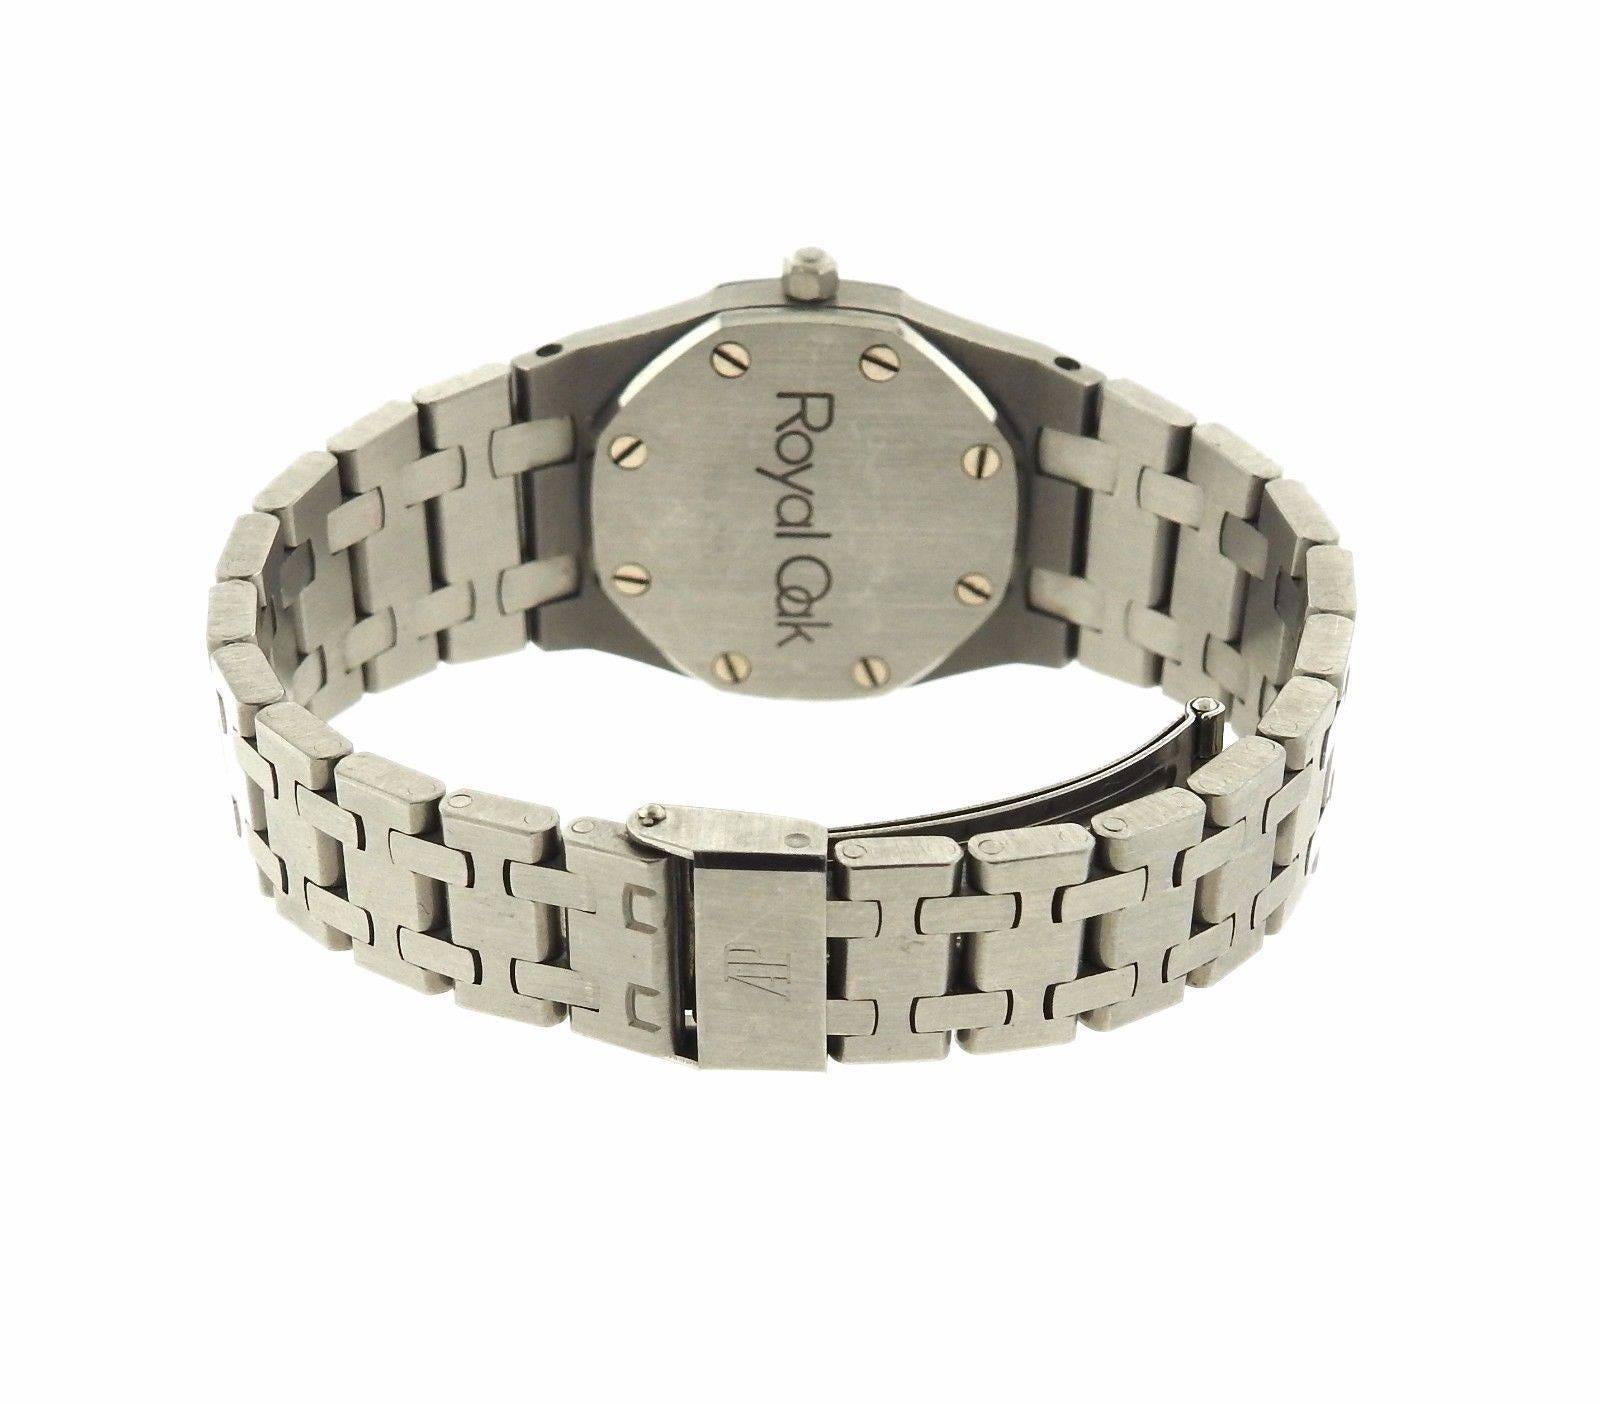 METAL	Stainless Steel
MEASUREMENTS	Case - 34mm X 26mm, Bracelet will fit up to 6